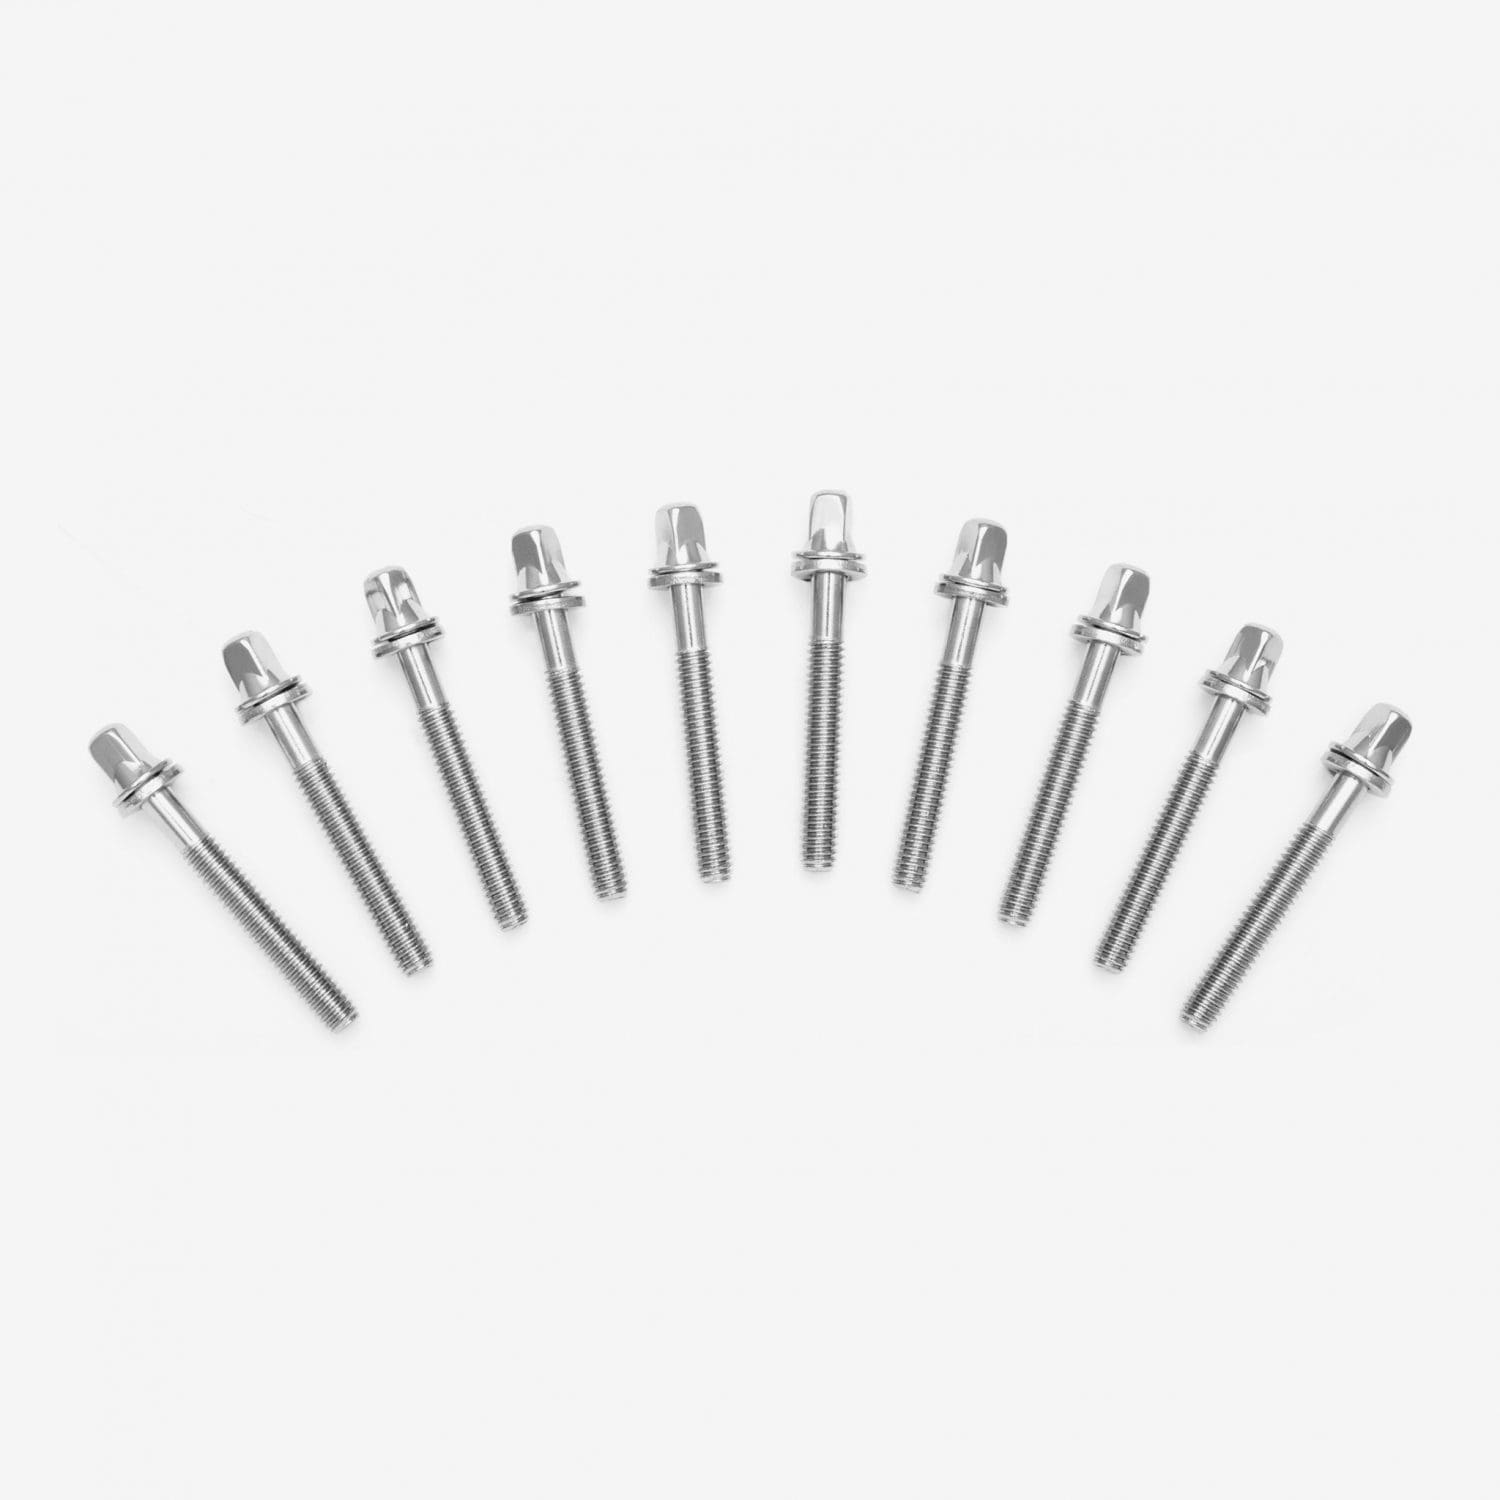 10-Pack Tension Rods